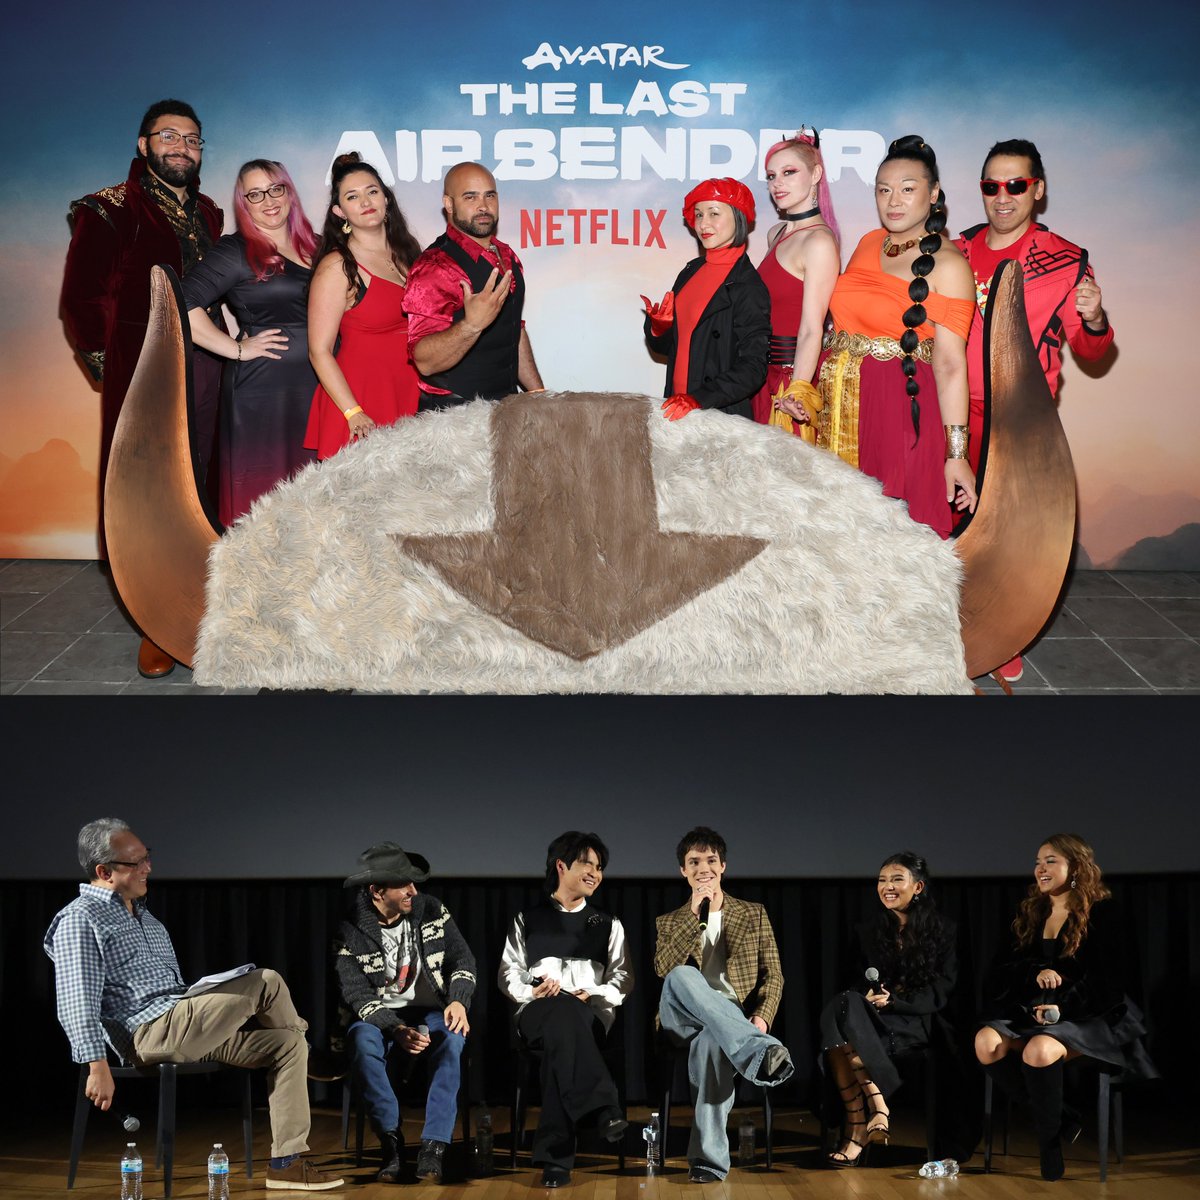 Prism Comics thanks @netflix and @Goldhouse for inviting friends of Prism to a special preview of Avatar: The Last Airbender with stars and exec producers, Albert Kim & Jabbar Raisani debuting Thurs, Feb 22 - netflix.com/title/80237957 @ConTodo @StrongBlackLead @NetflixGolden @Most